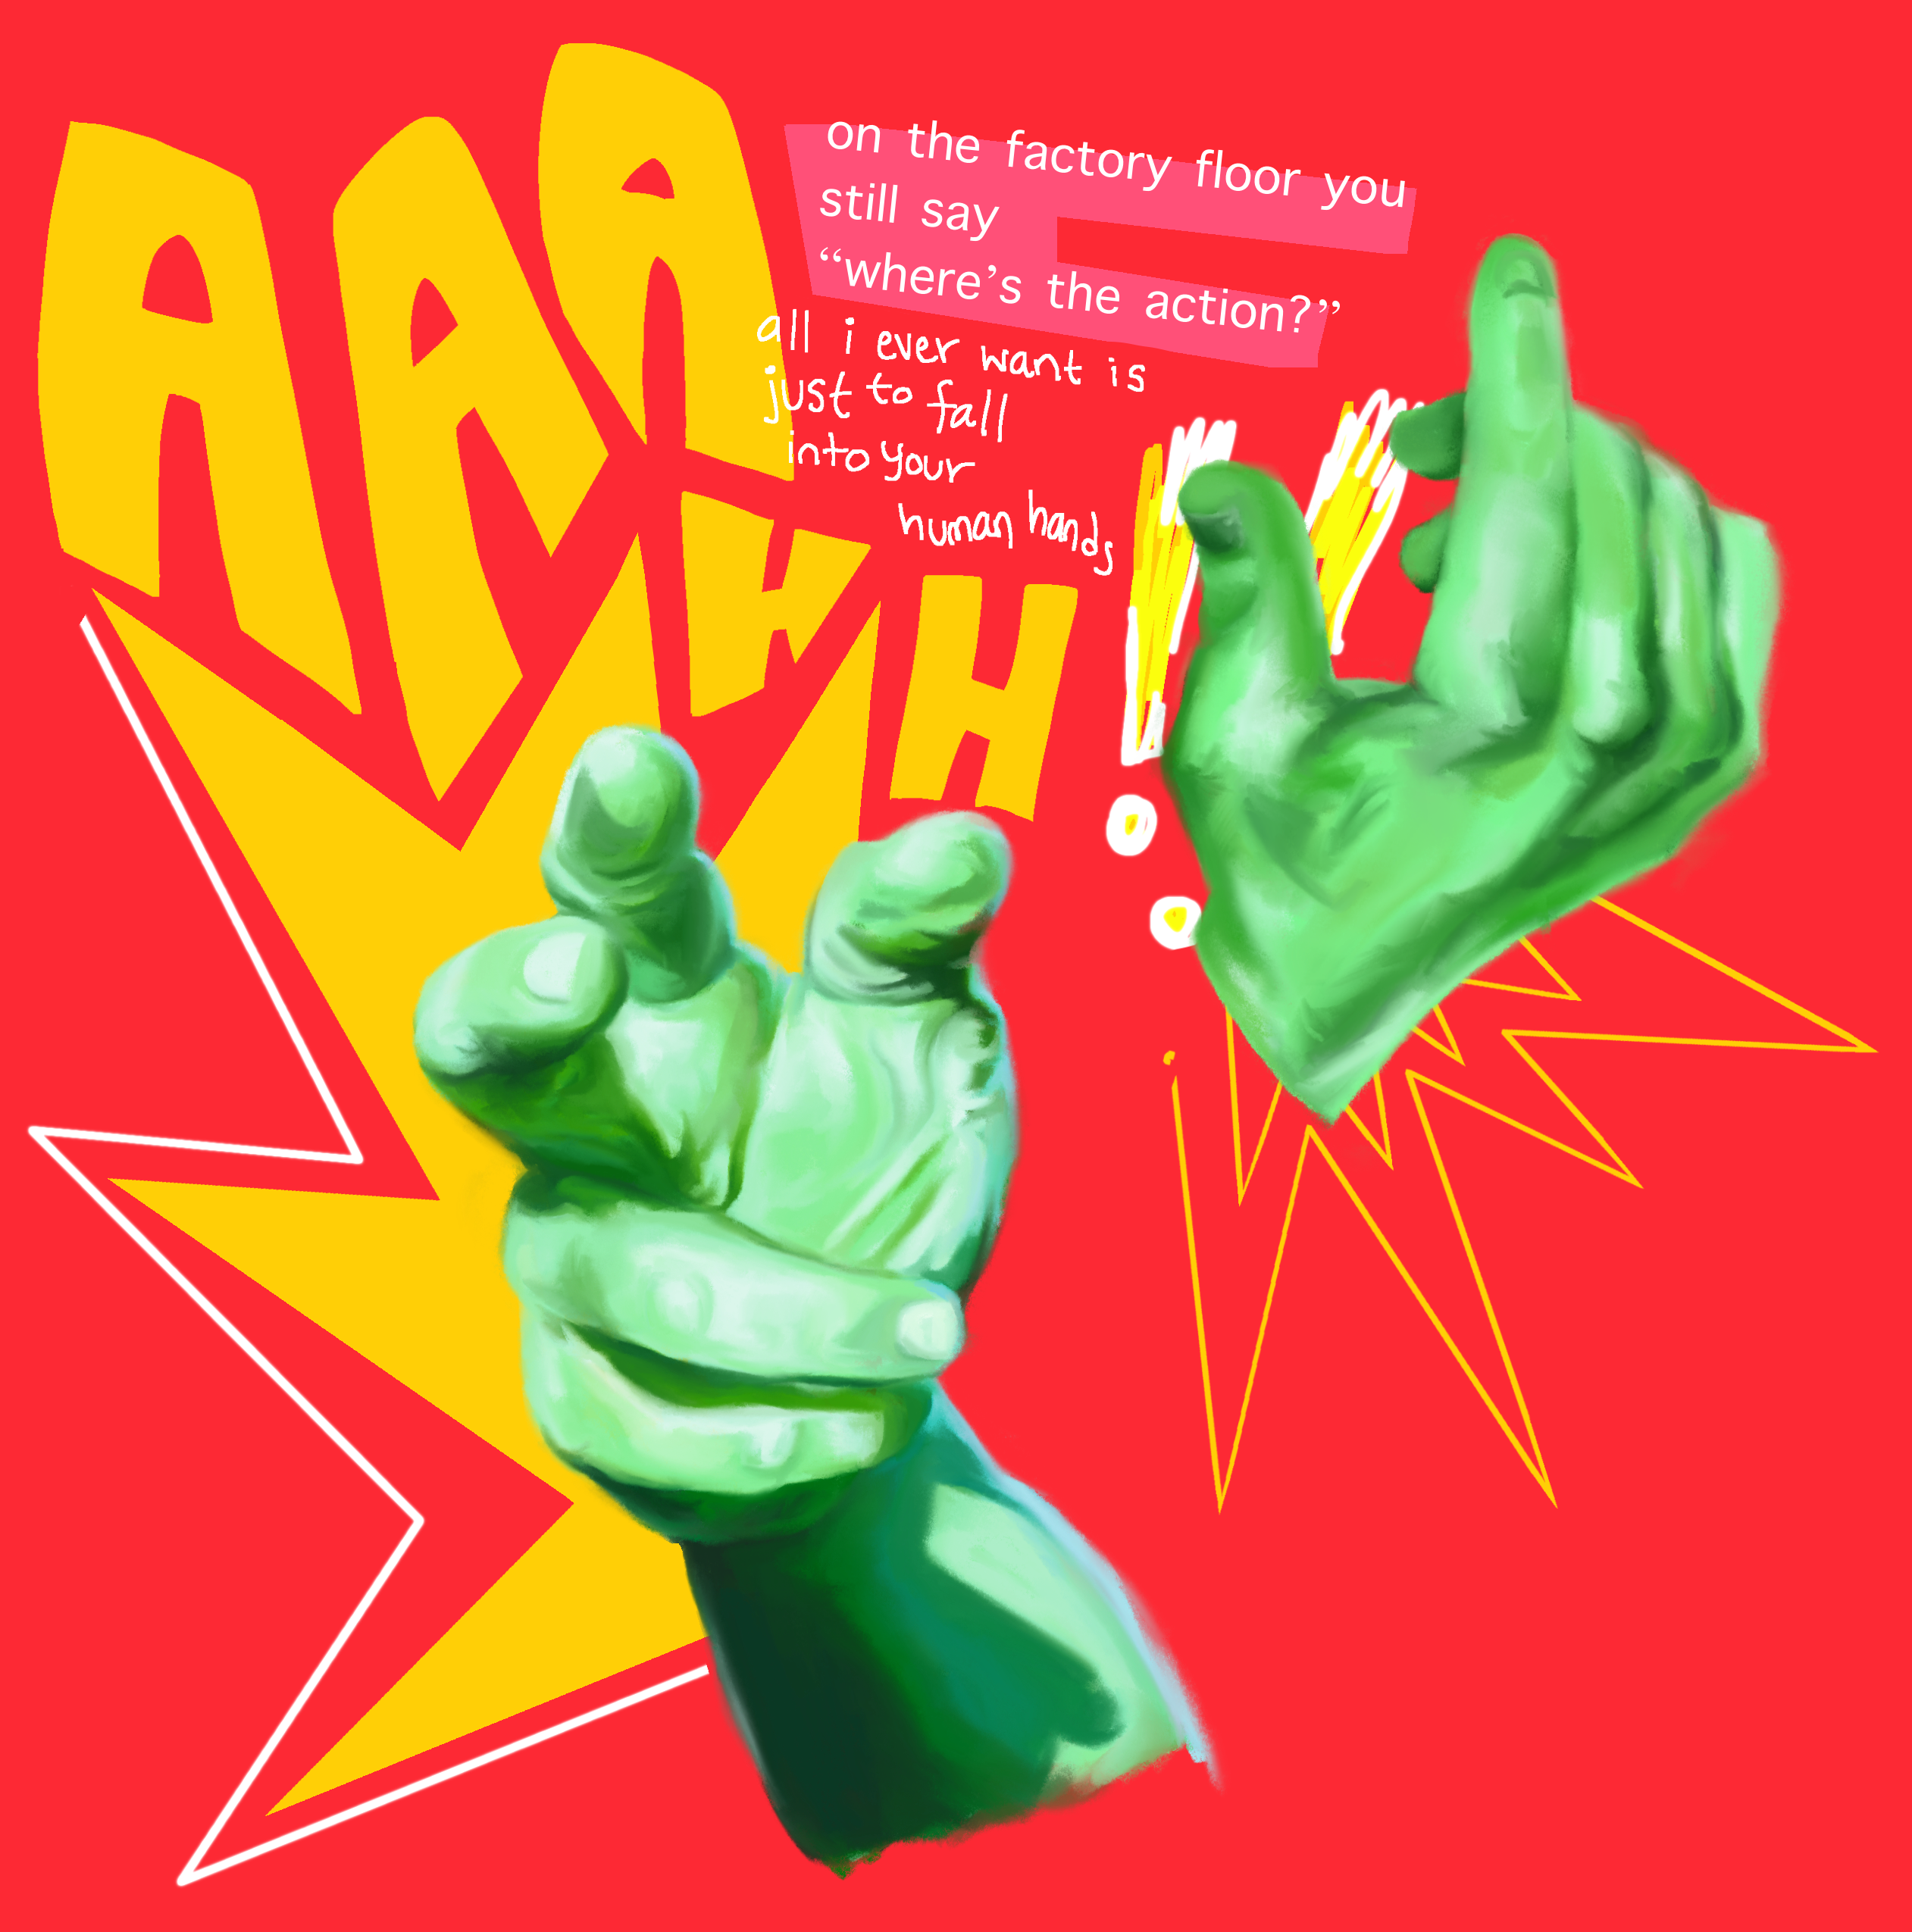 two digitally painted green hands on a red background, with yellow star-like pointed shapes and text behind them. The large drawn text reads ‘AAAHH!!’ and the smaller text reads ‘on the factory floor you still say, where’s the action?/ all i ever want is just to fall into your human hands.’ Second text is from the song ‘Human Hands’ by Elvis Costello and the Attractions